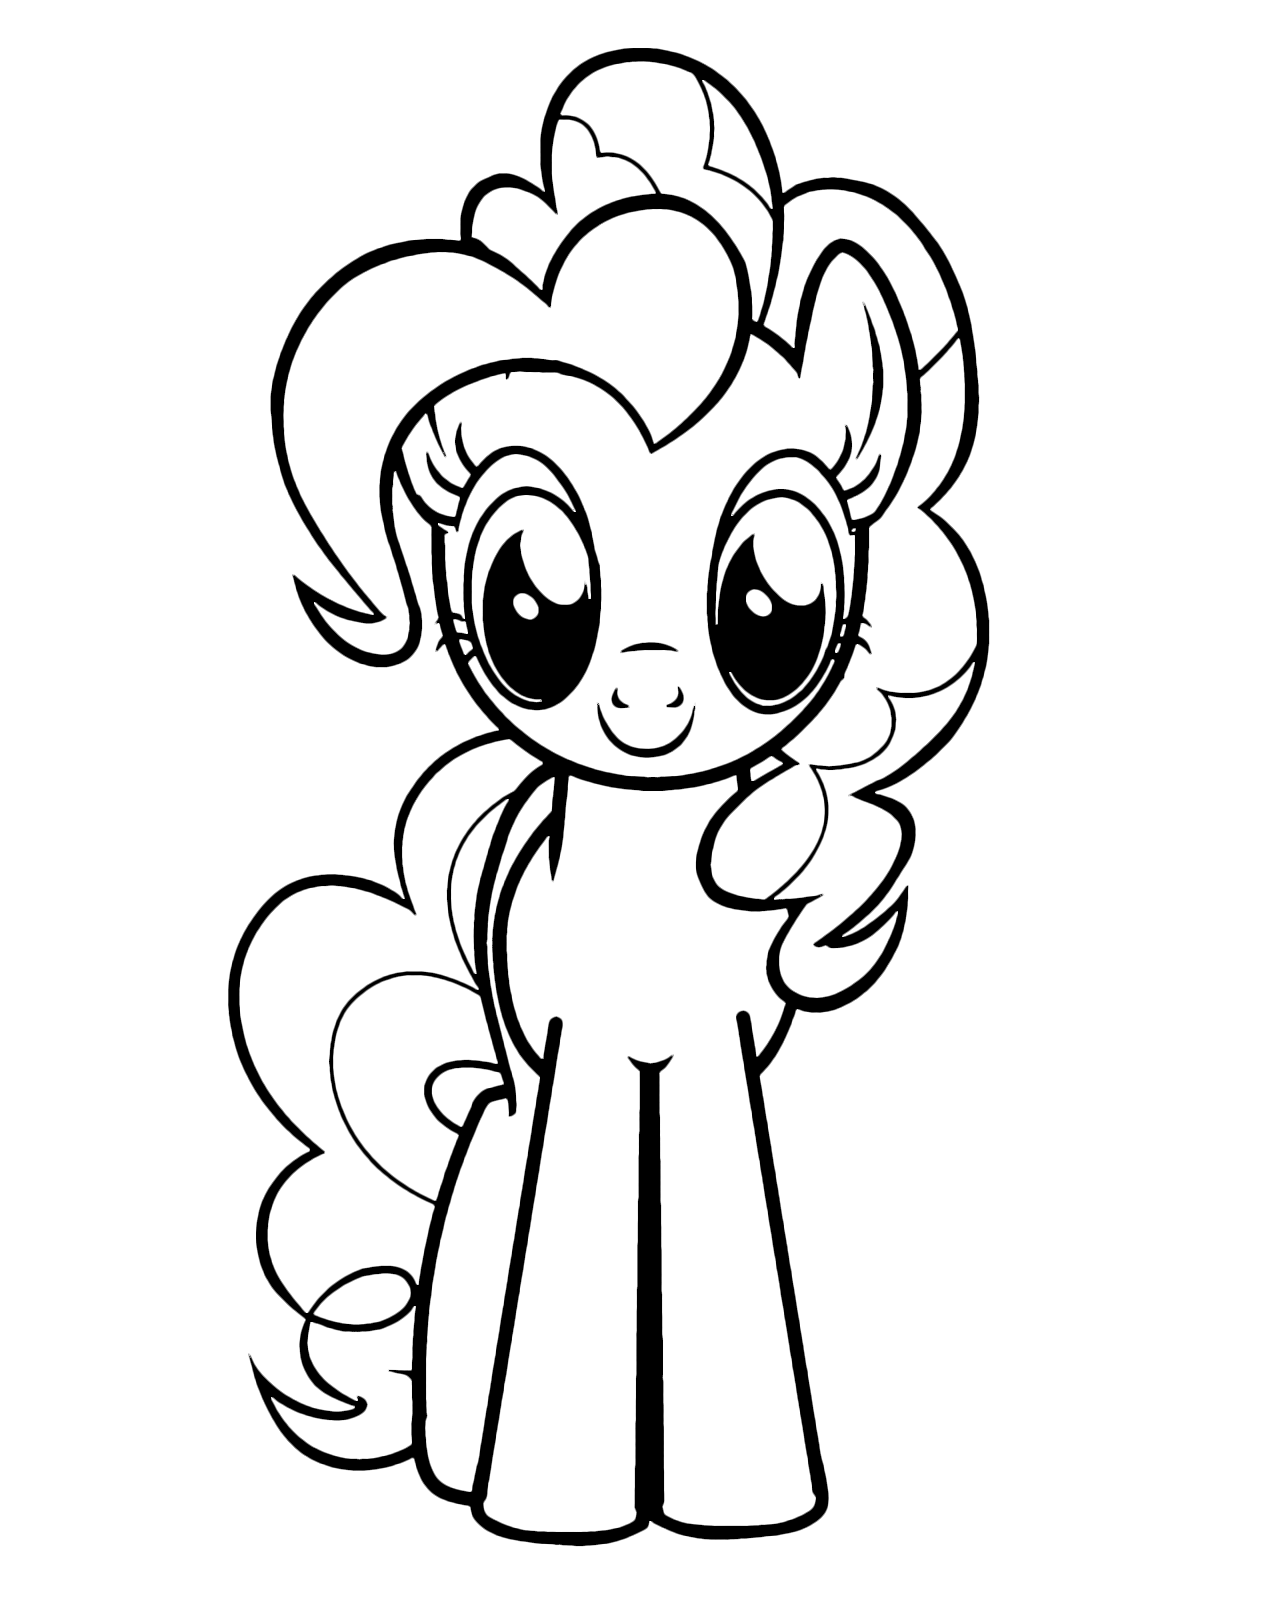 My Little Pony - Pinkie Pie looks with her witty eyes